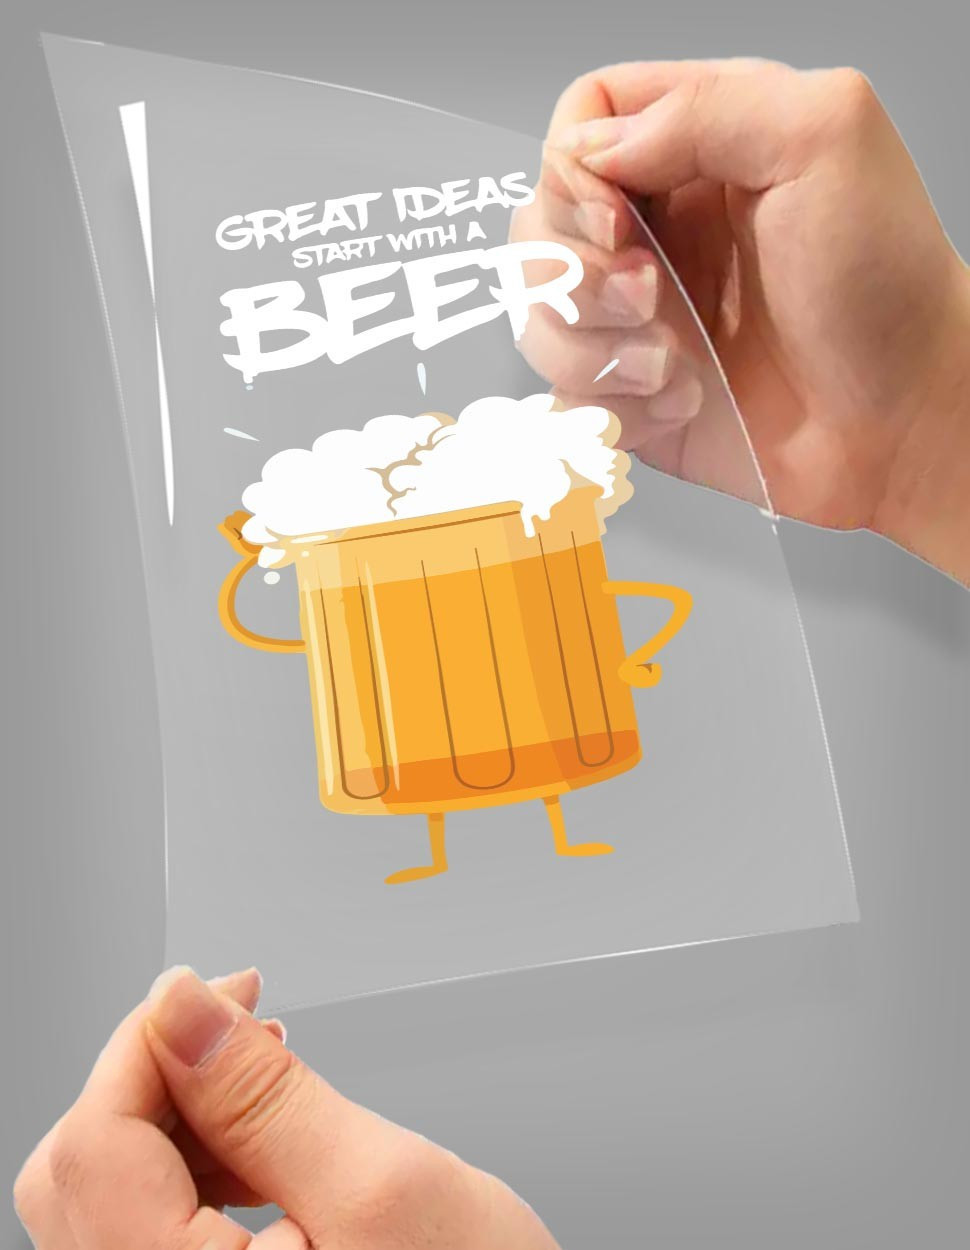 Great Ideas Start With A Beer A4 Stick Zing